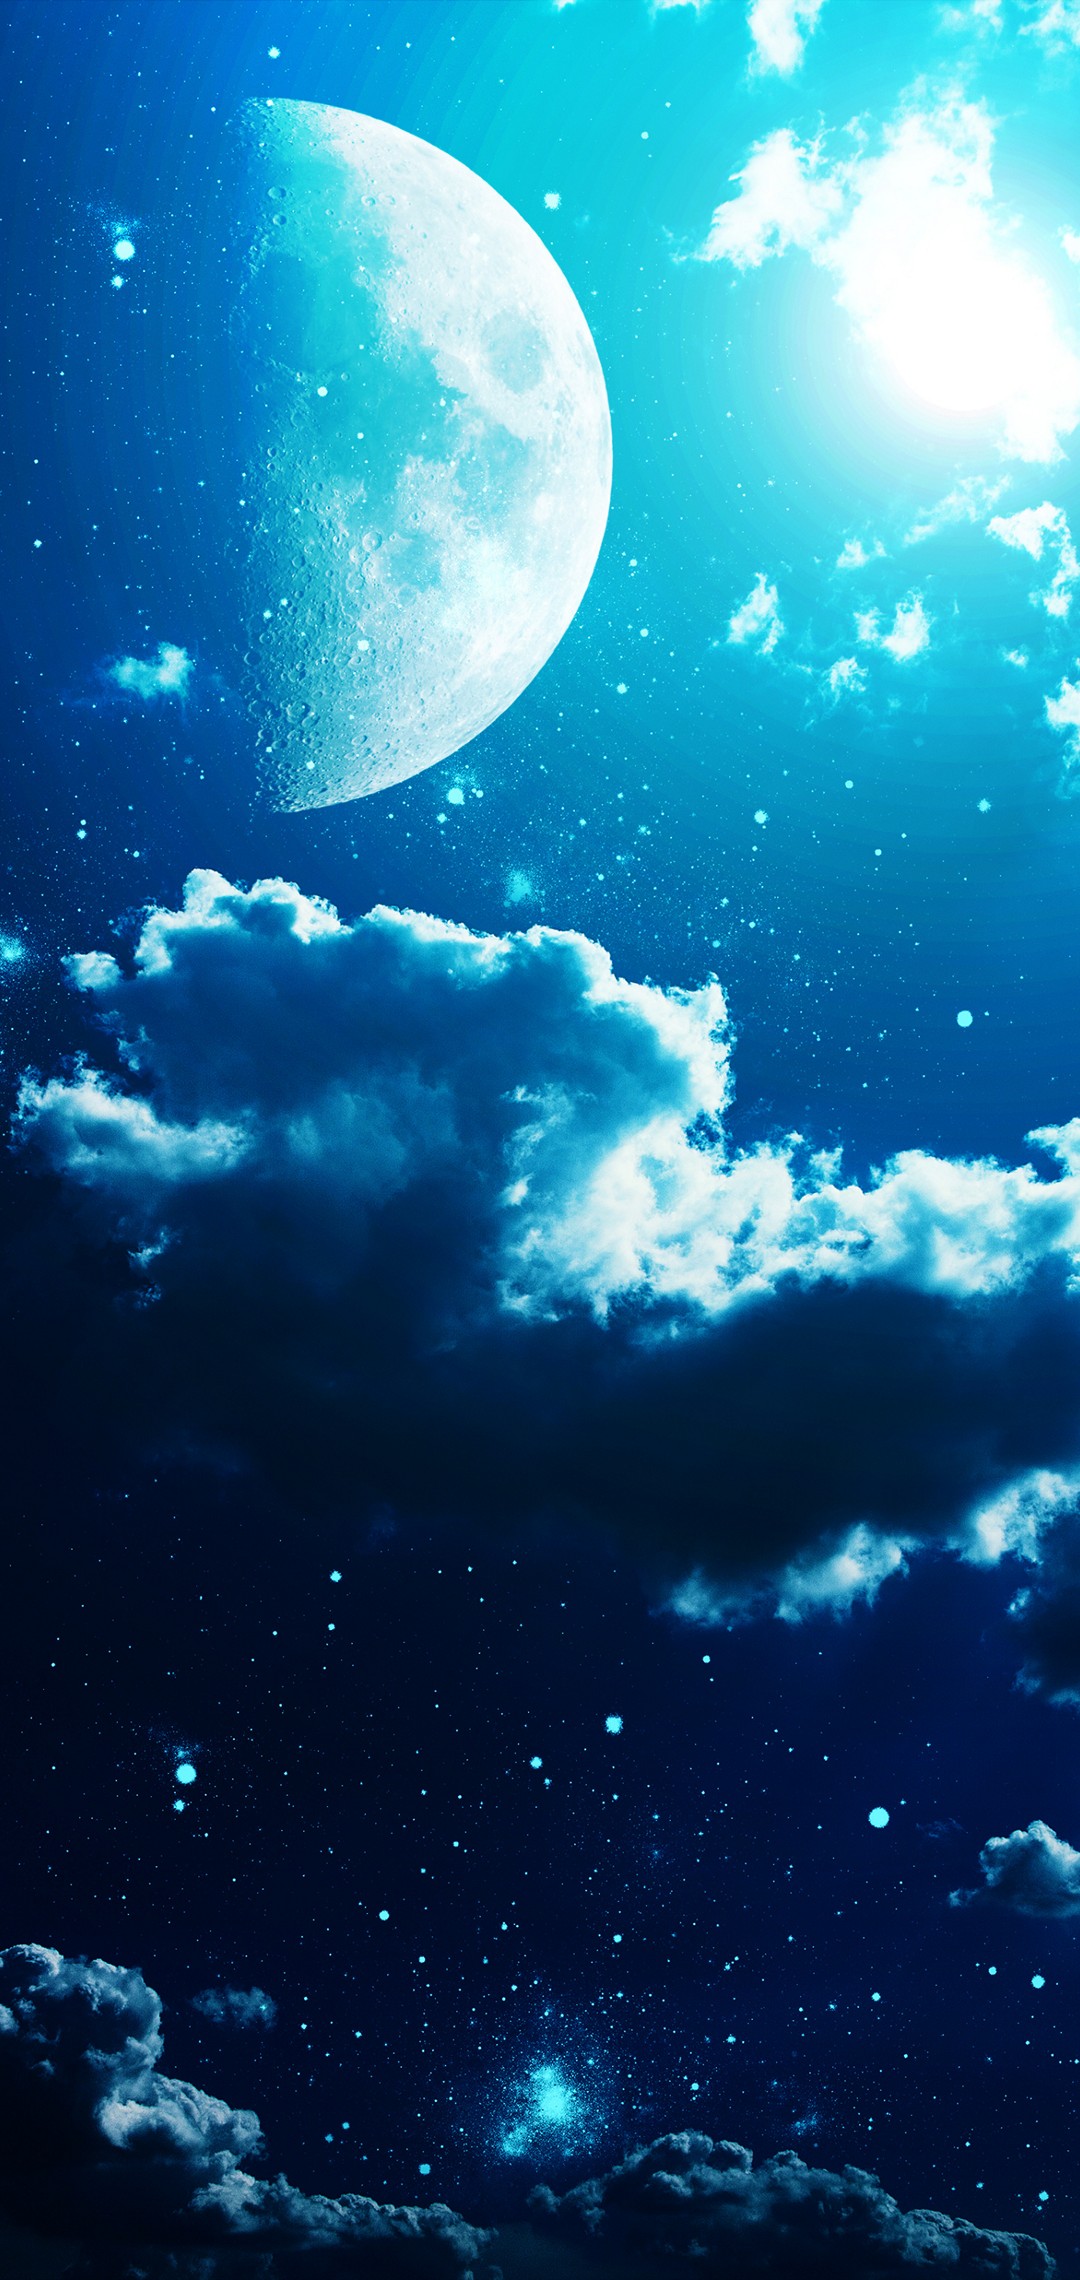 Download wallpaper 1080x1920 night clouds and moon sky 1080p wallpaper  samsung galaxy s4 s5 note sony xperia z z1 z2 z3 htc one lenovo  vibe google pixel 2 oneplus 5 honor 9